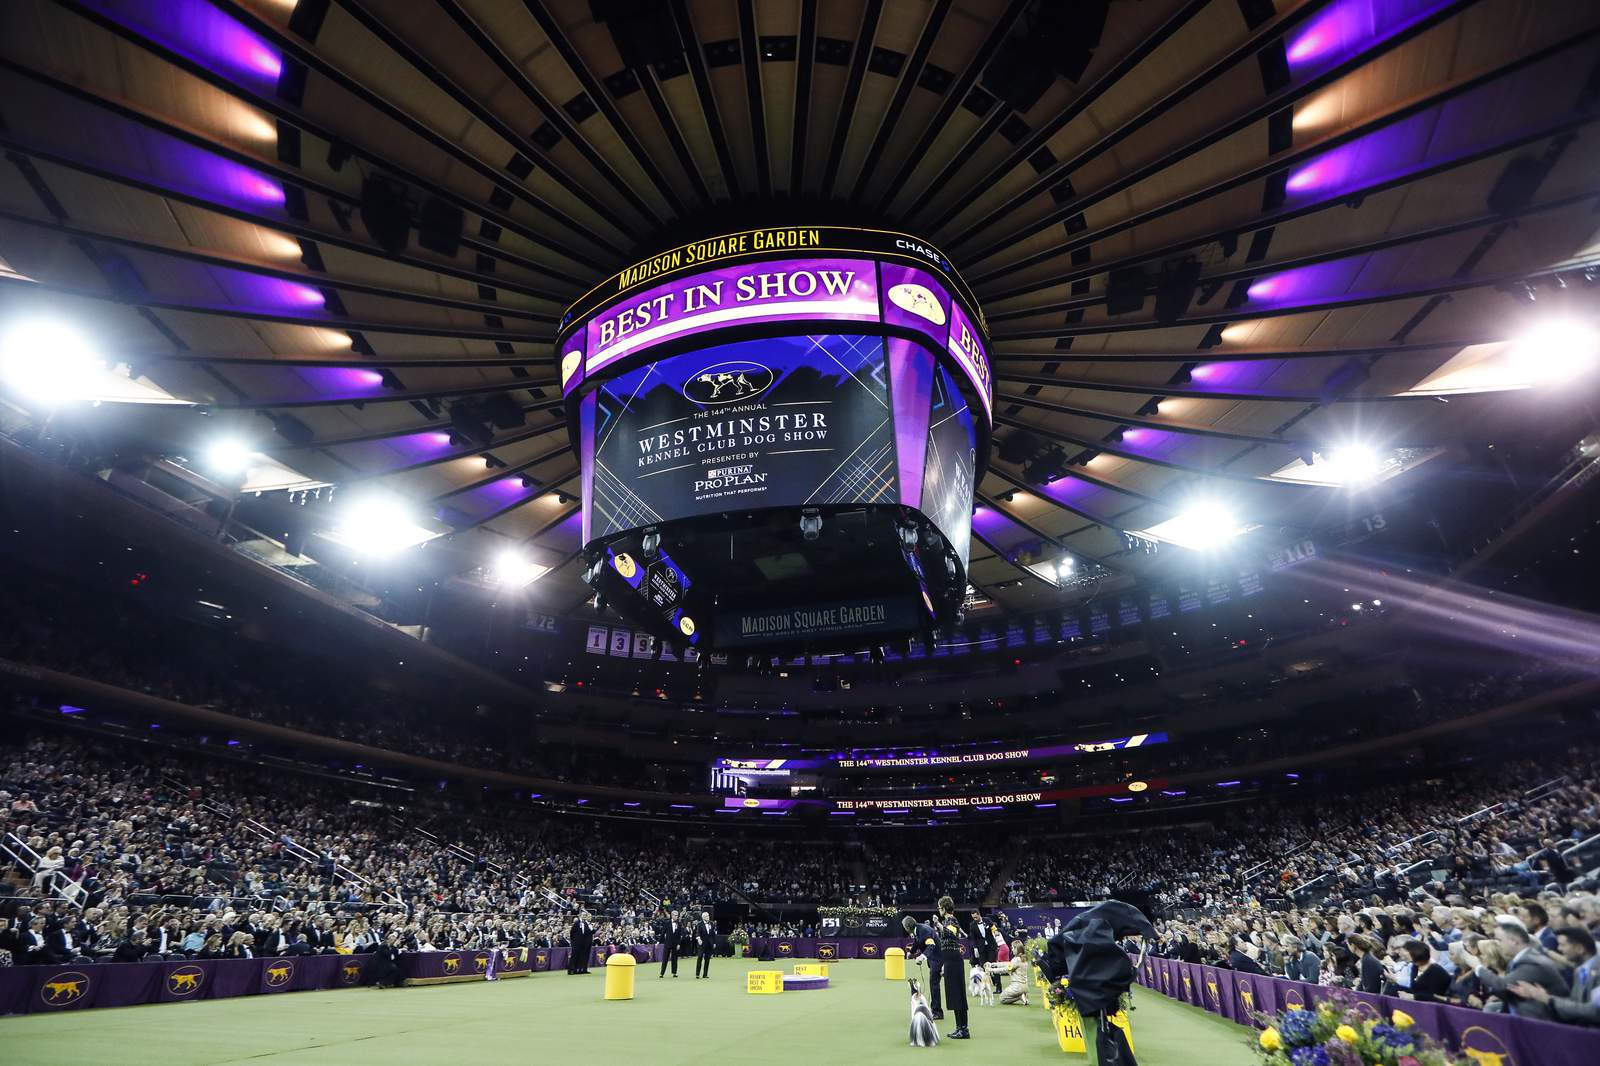 Wanna go for a walk? Westminster dog show leaves NYC for '21